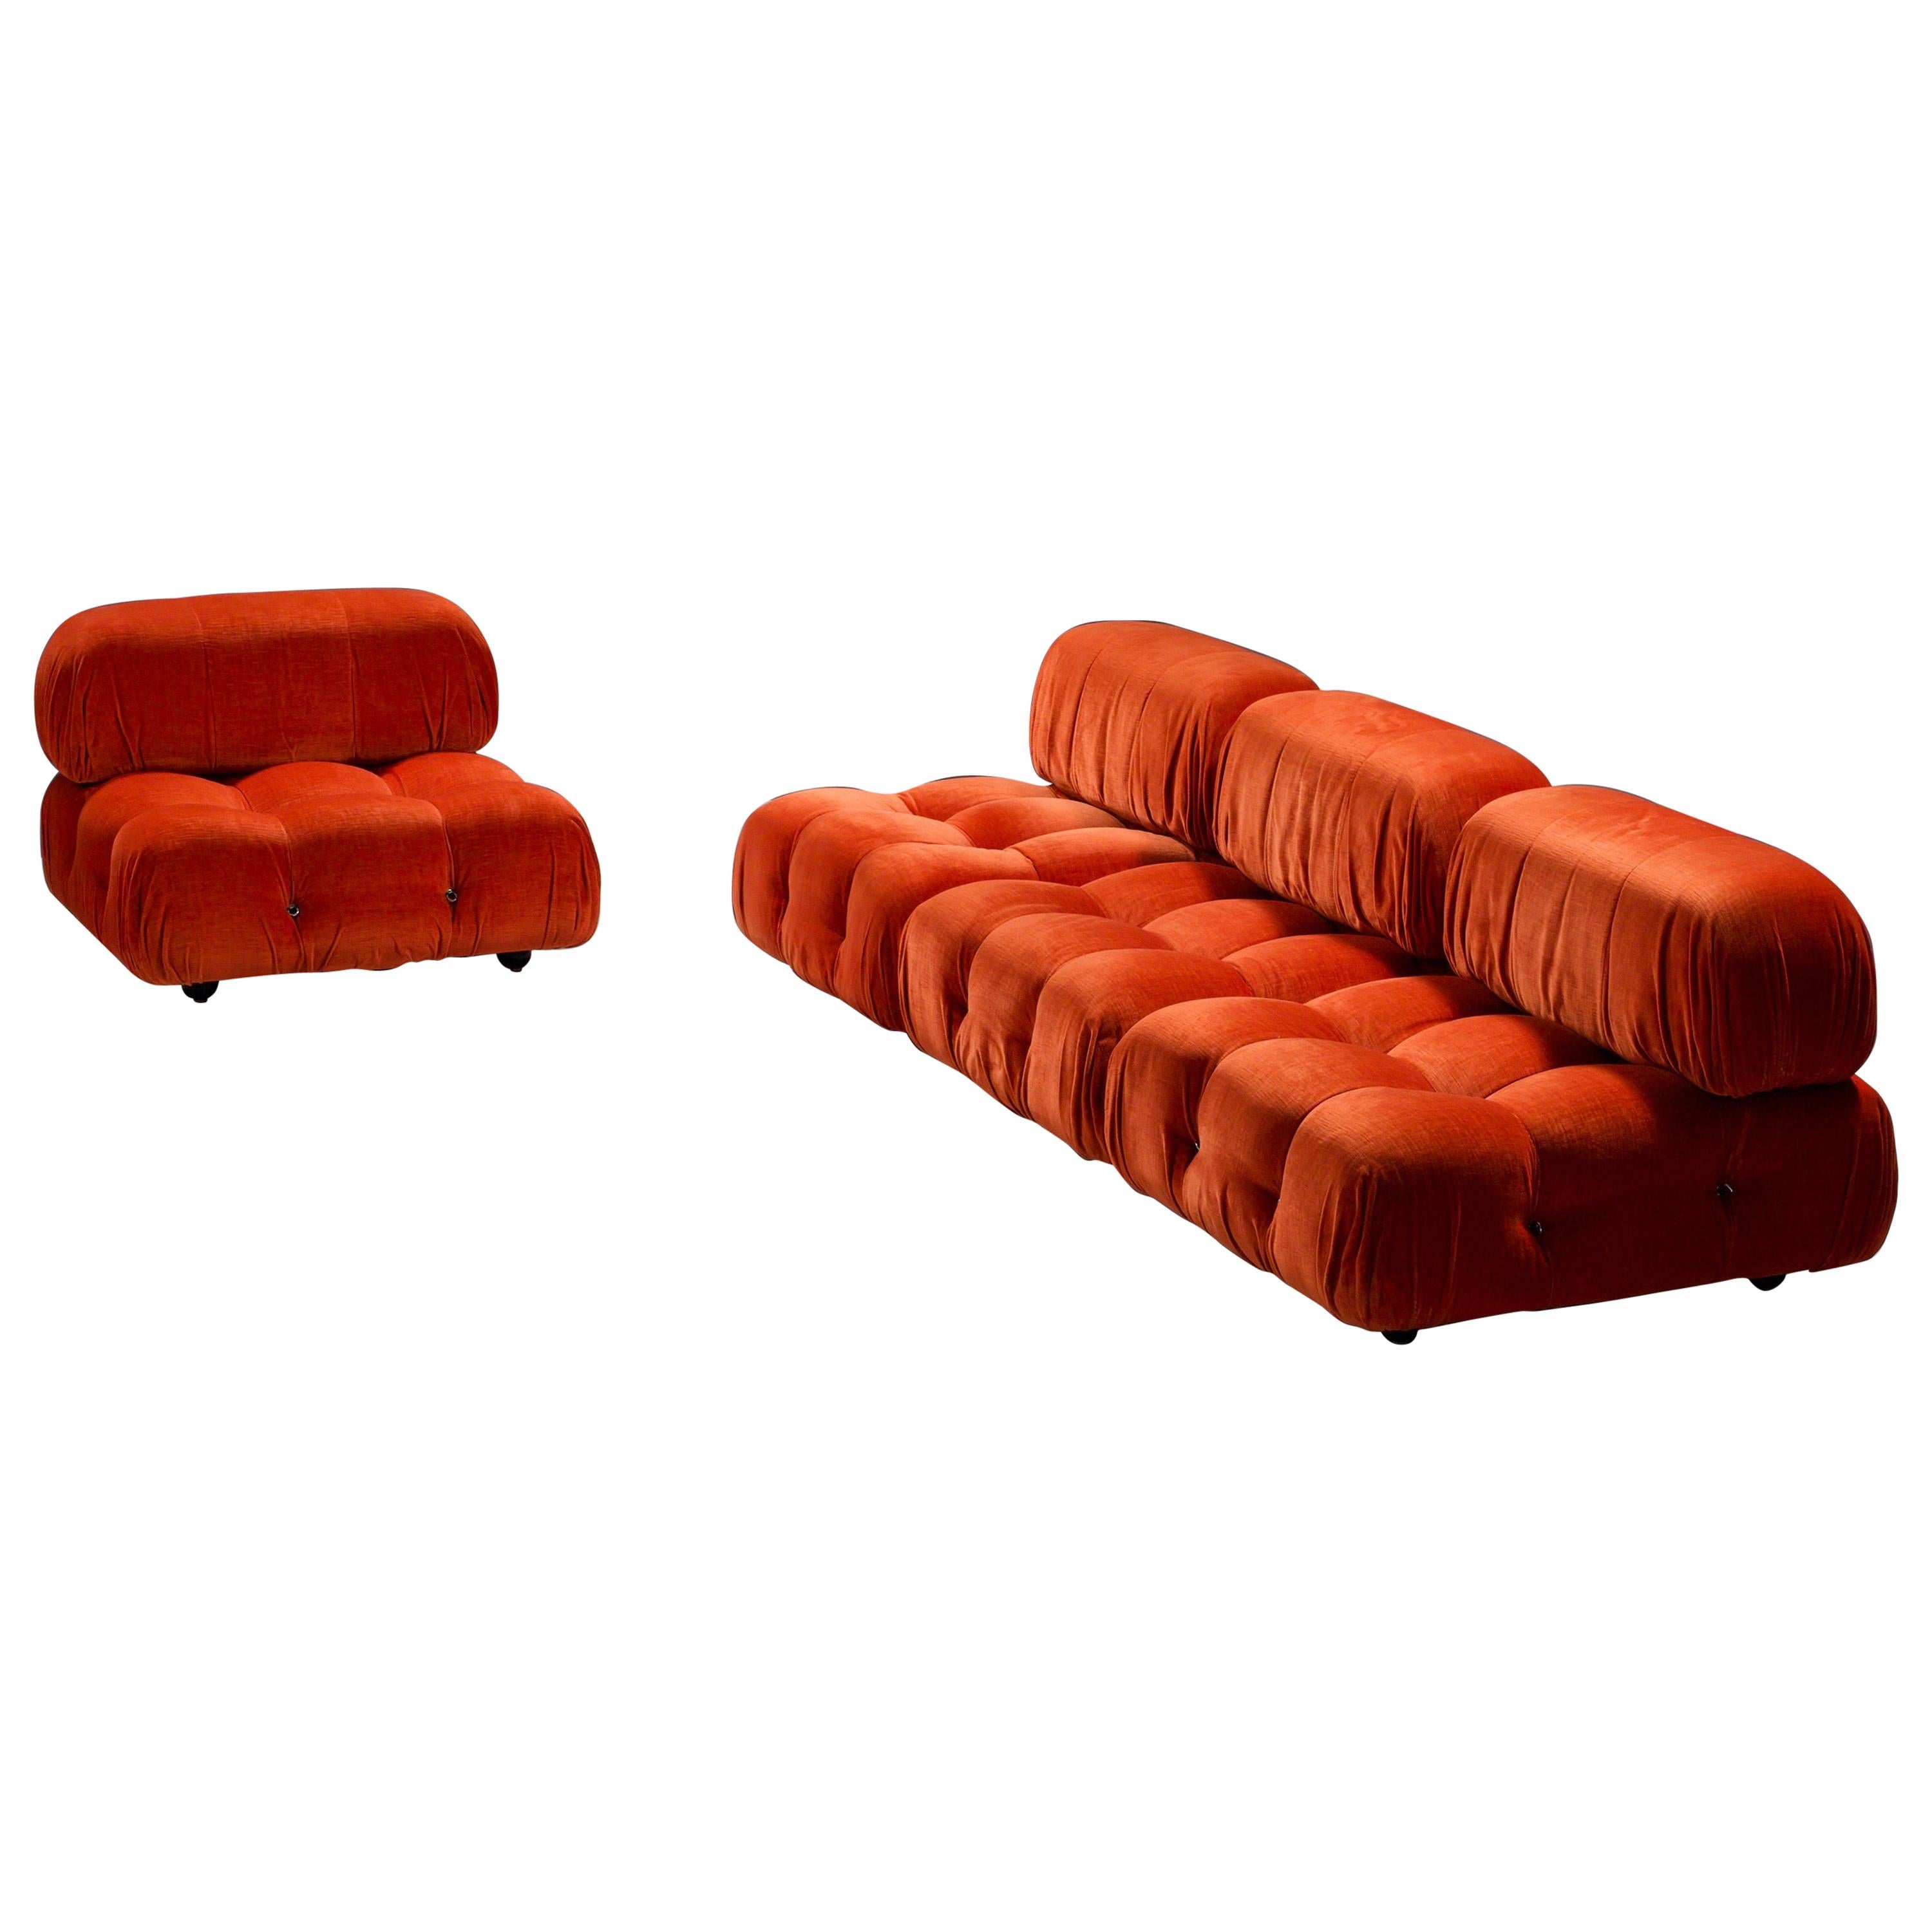 Camaleonda by Mario Bellini for B&B Italia, 1970.

Four larger pieces with backrests of the famous Camaleonda in an amazing condition. The sofa has always been covered in plastic, according to good Italian habit, which makes this an interesting